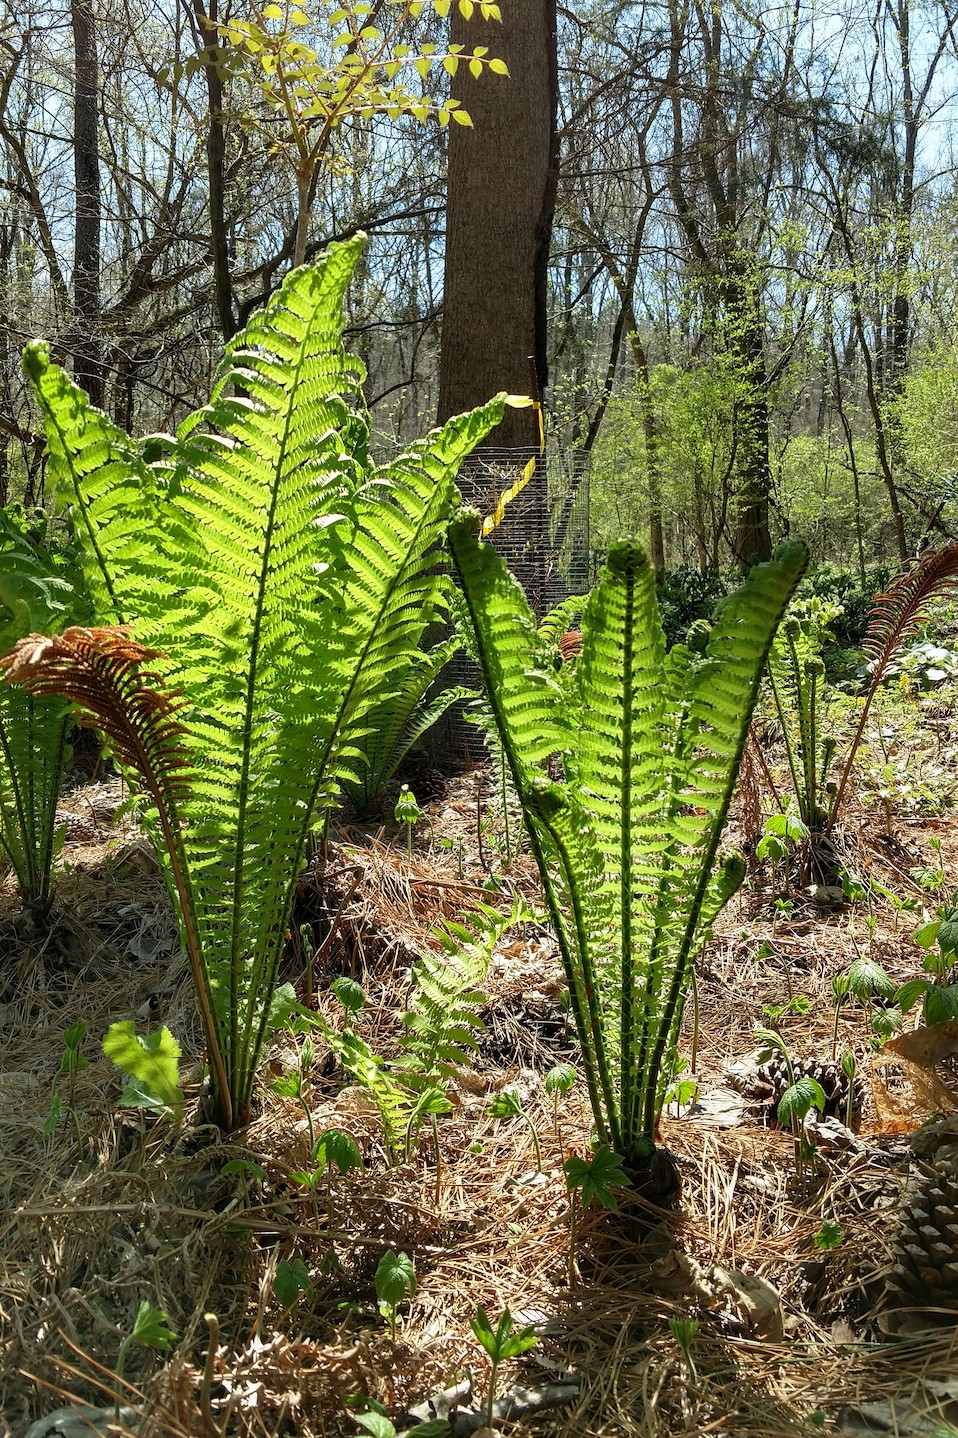 The Scientific Name is Matteuccia struthiopteris var. pensylvanica. You will likely hear them called Ostrich Fern. This picture shows the A heat tolerant cultivar 'The King'. The earliest fiddleheads to emerge in spring. of Matteuccia struthiopteris var. pensylvanica